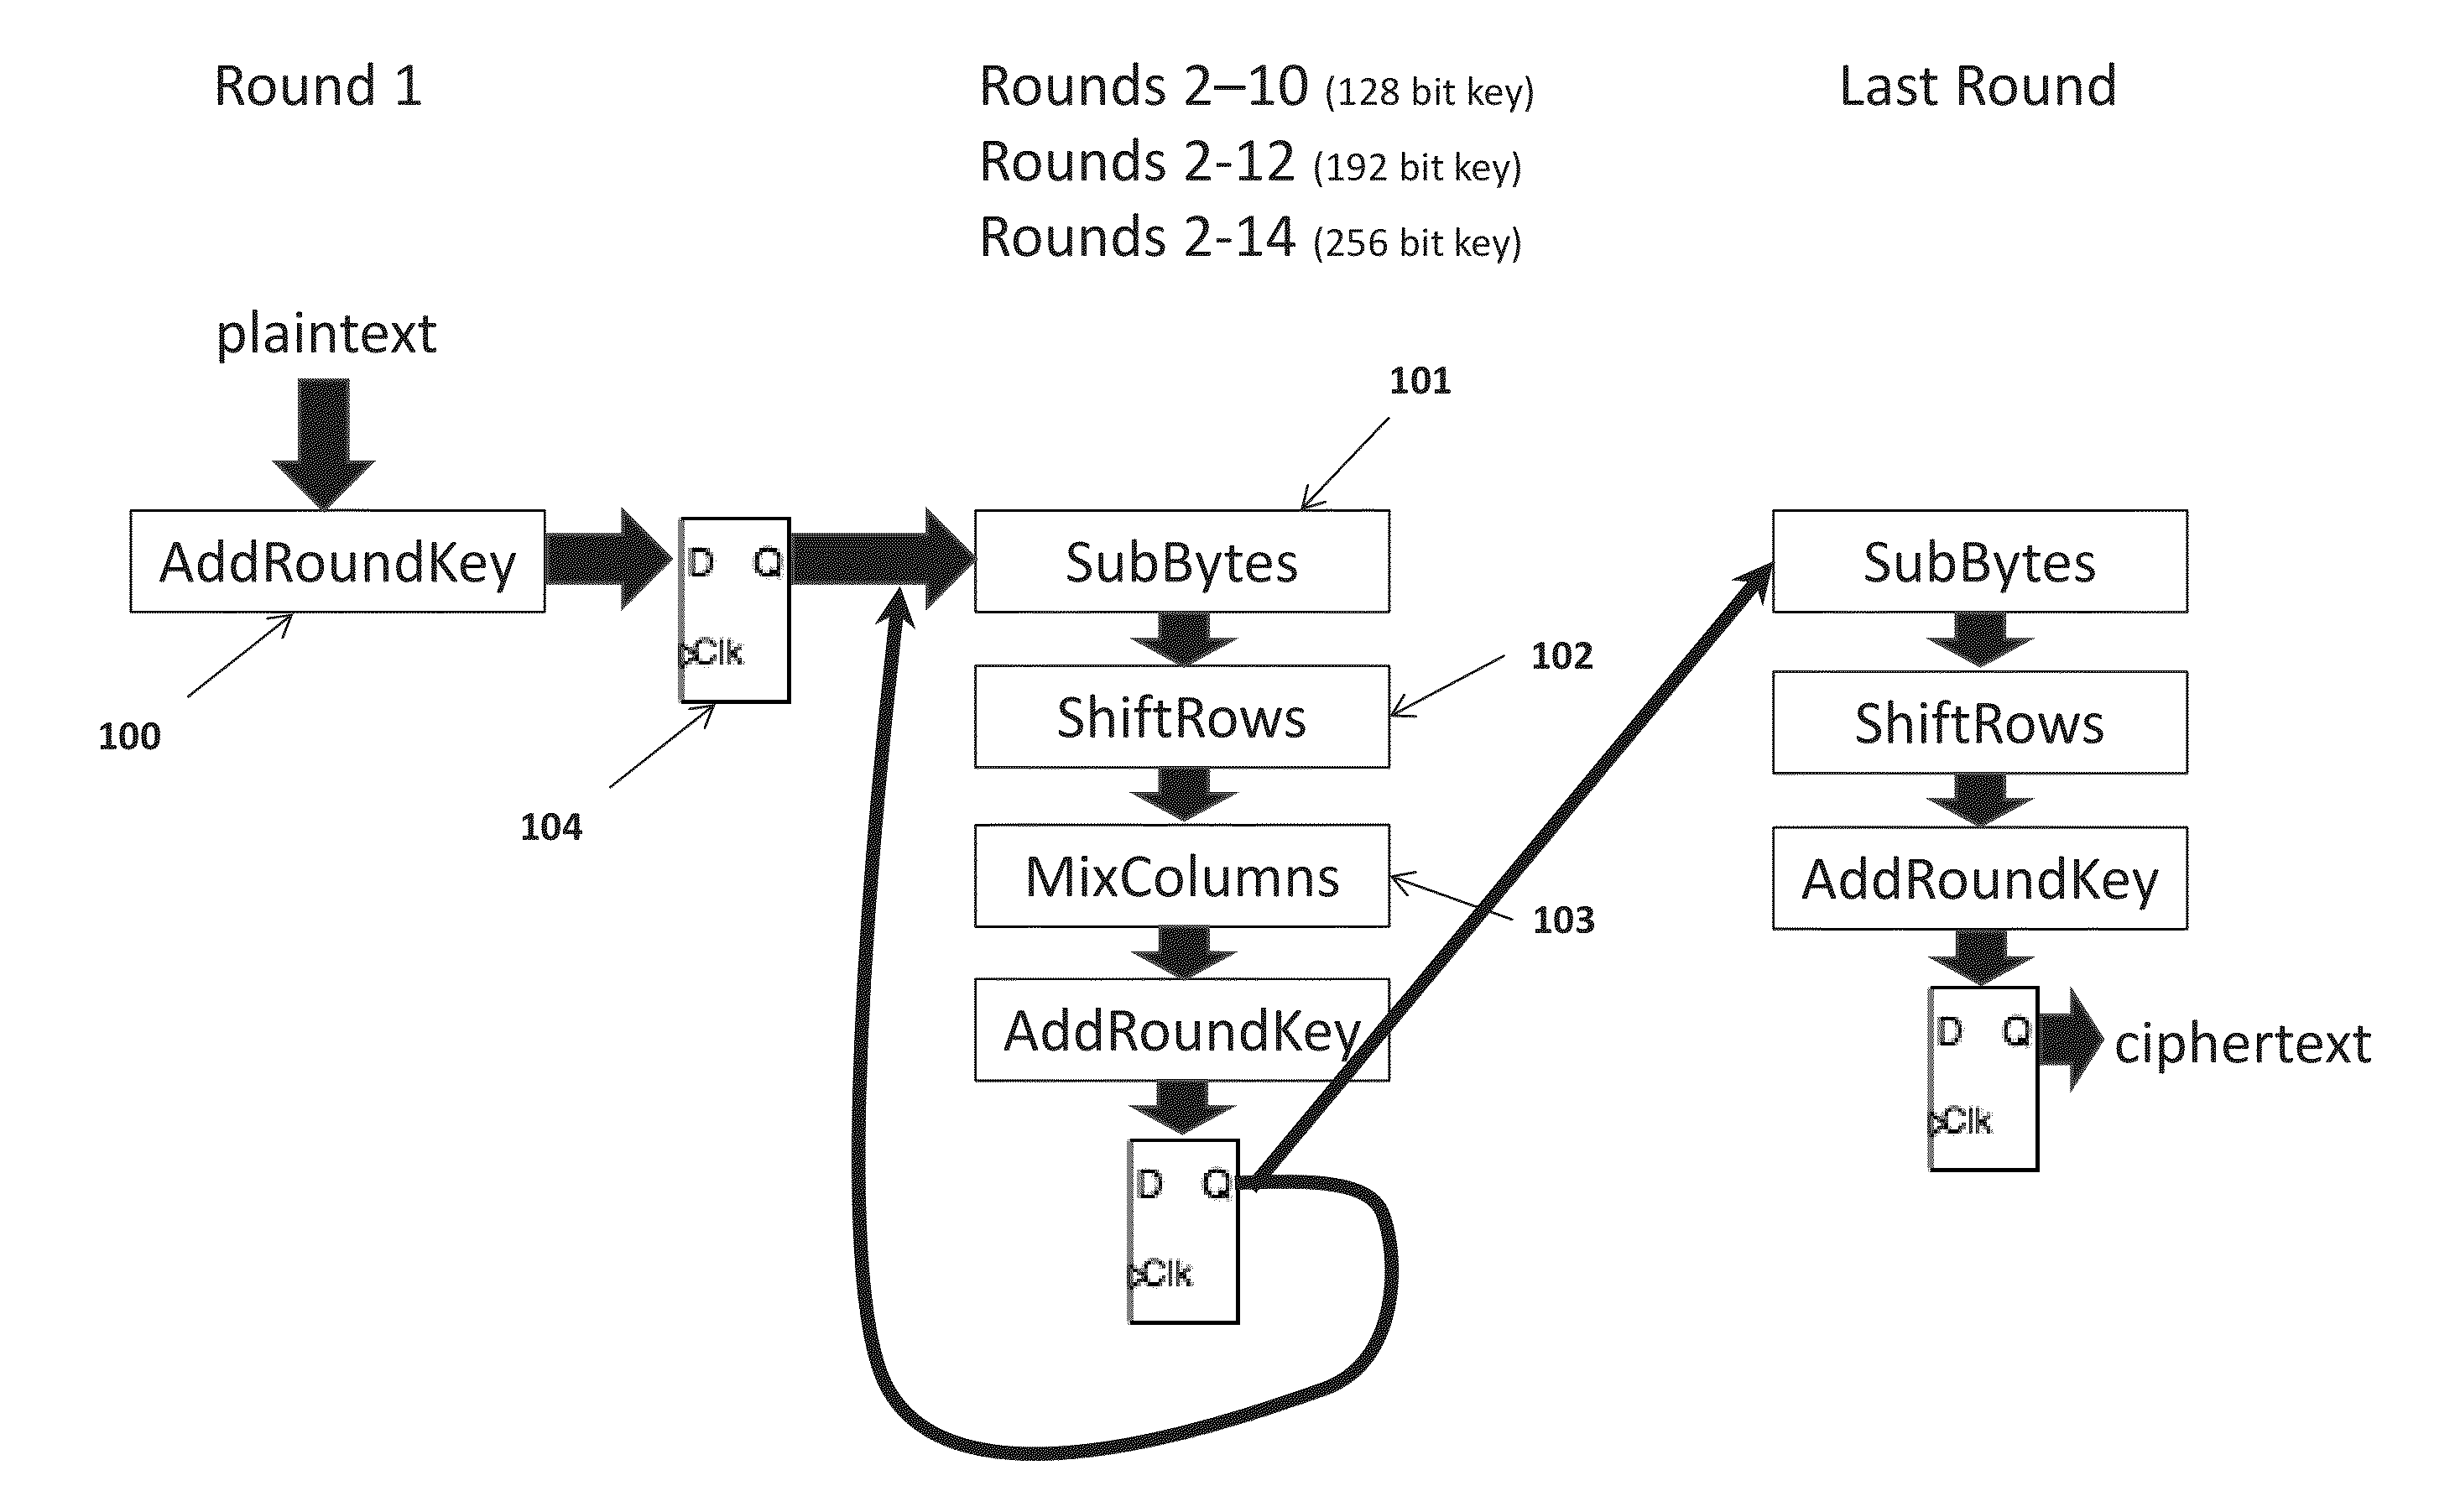 Apparatus and method to prevent side channel power attacks in advanced encryption standard